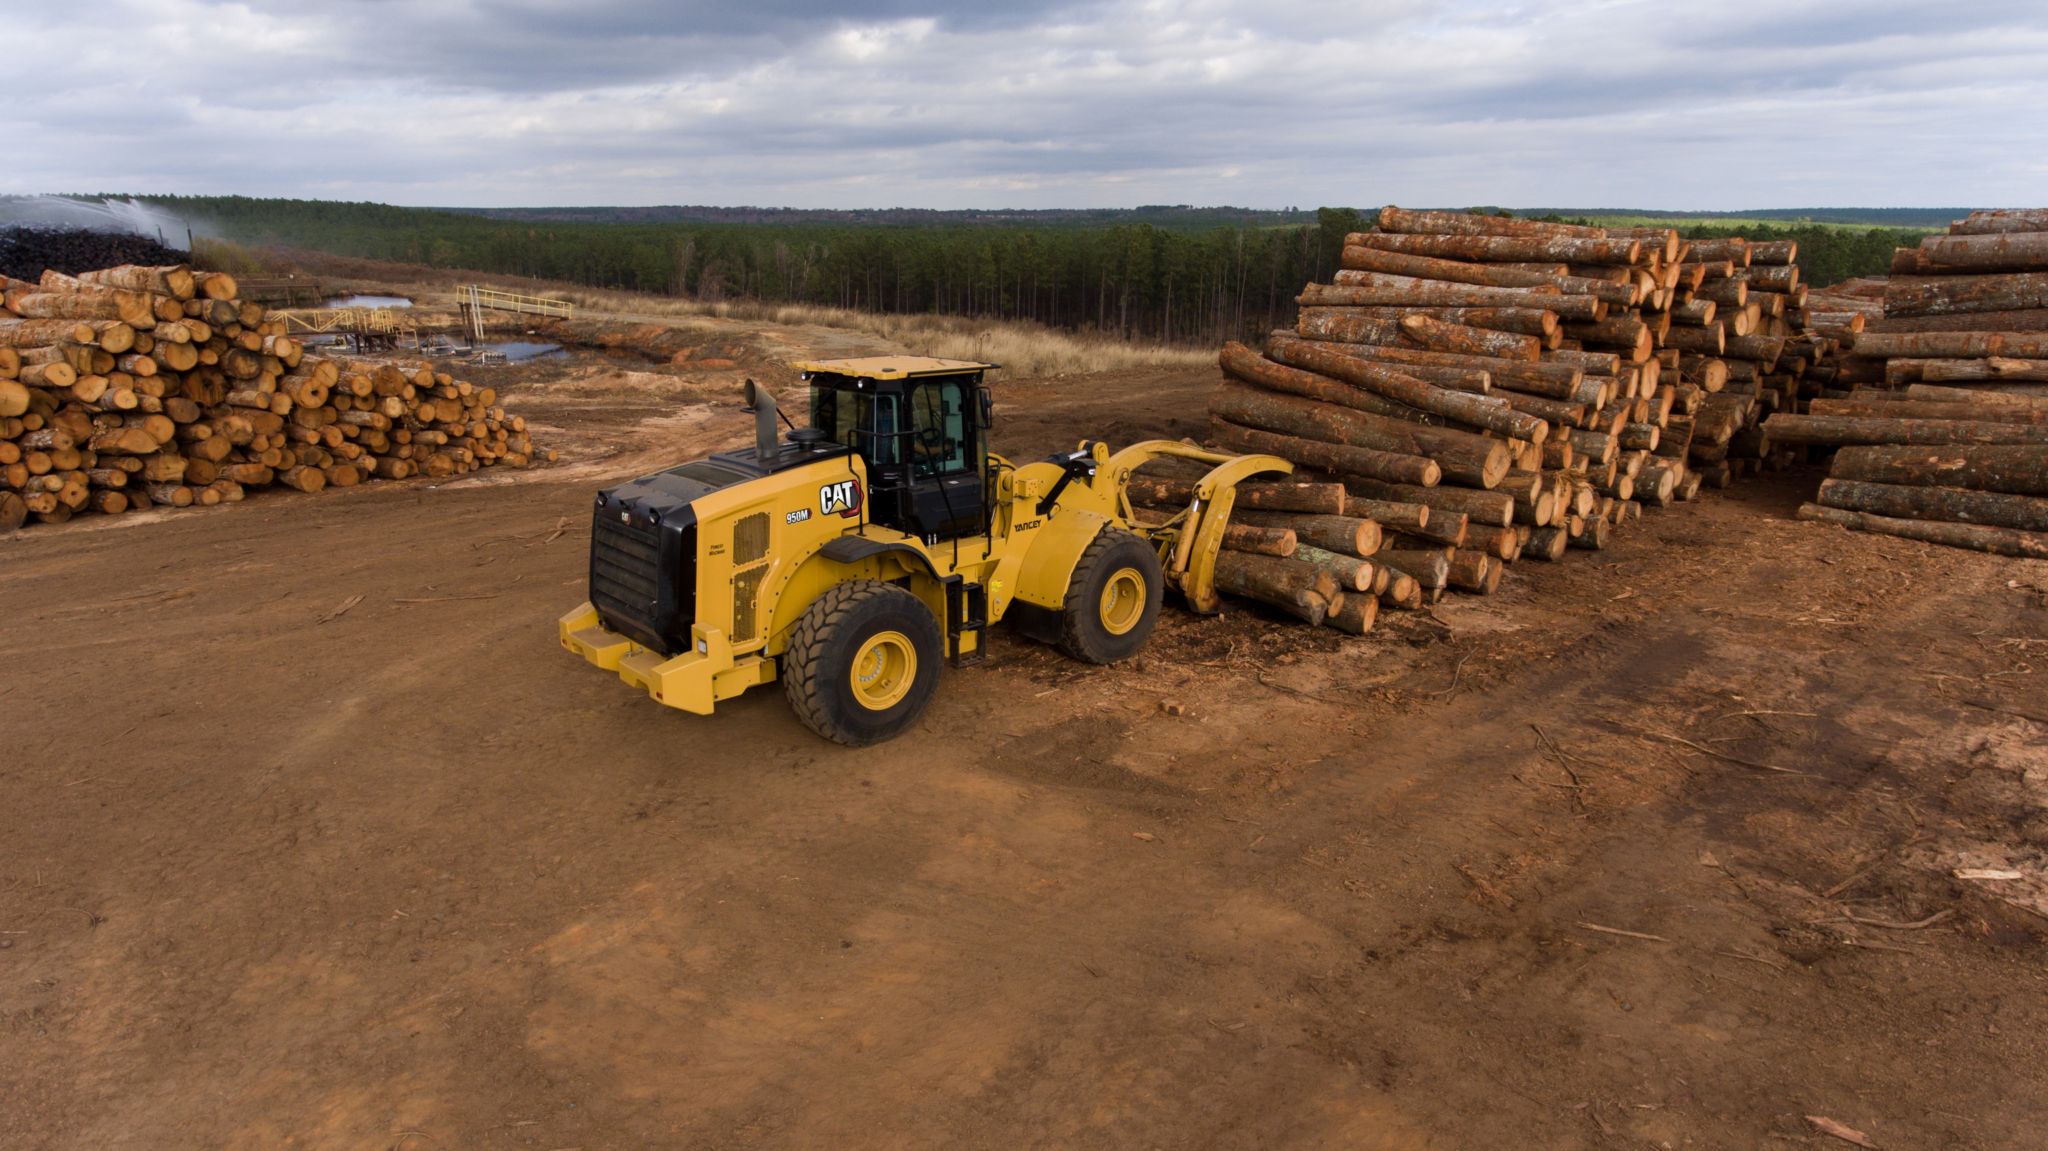 Education requirements for forestry jobs